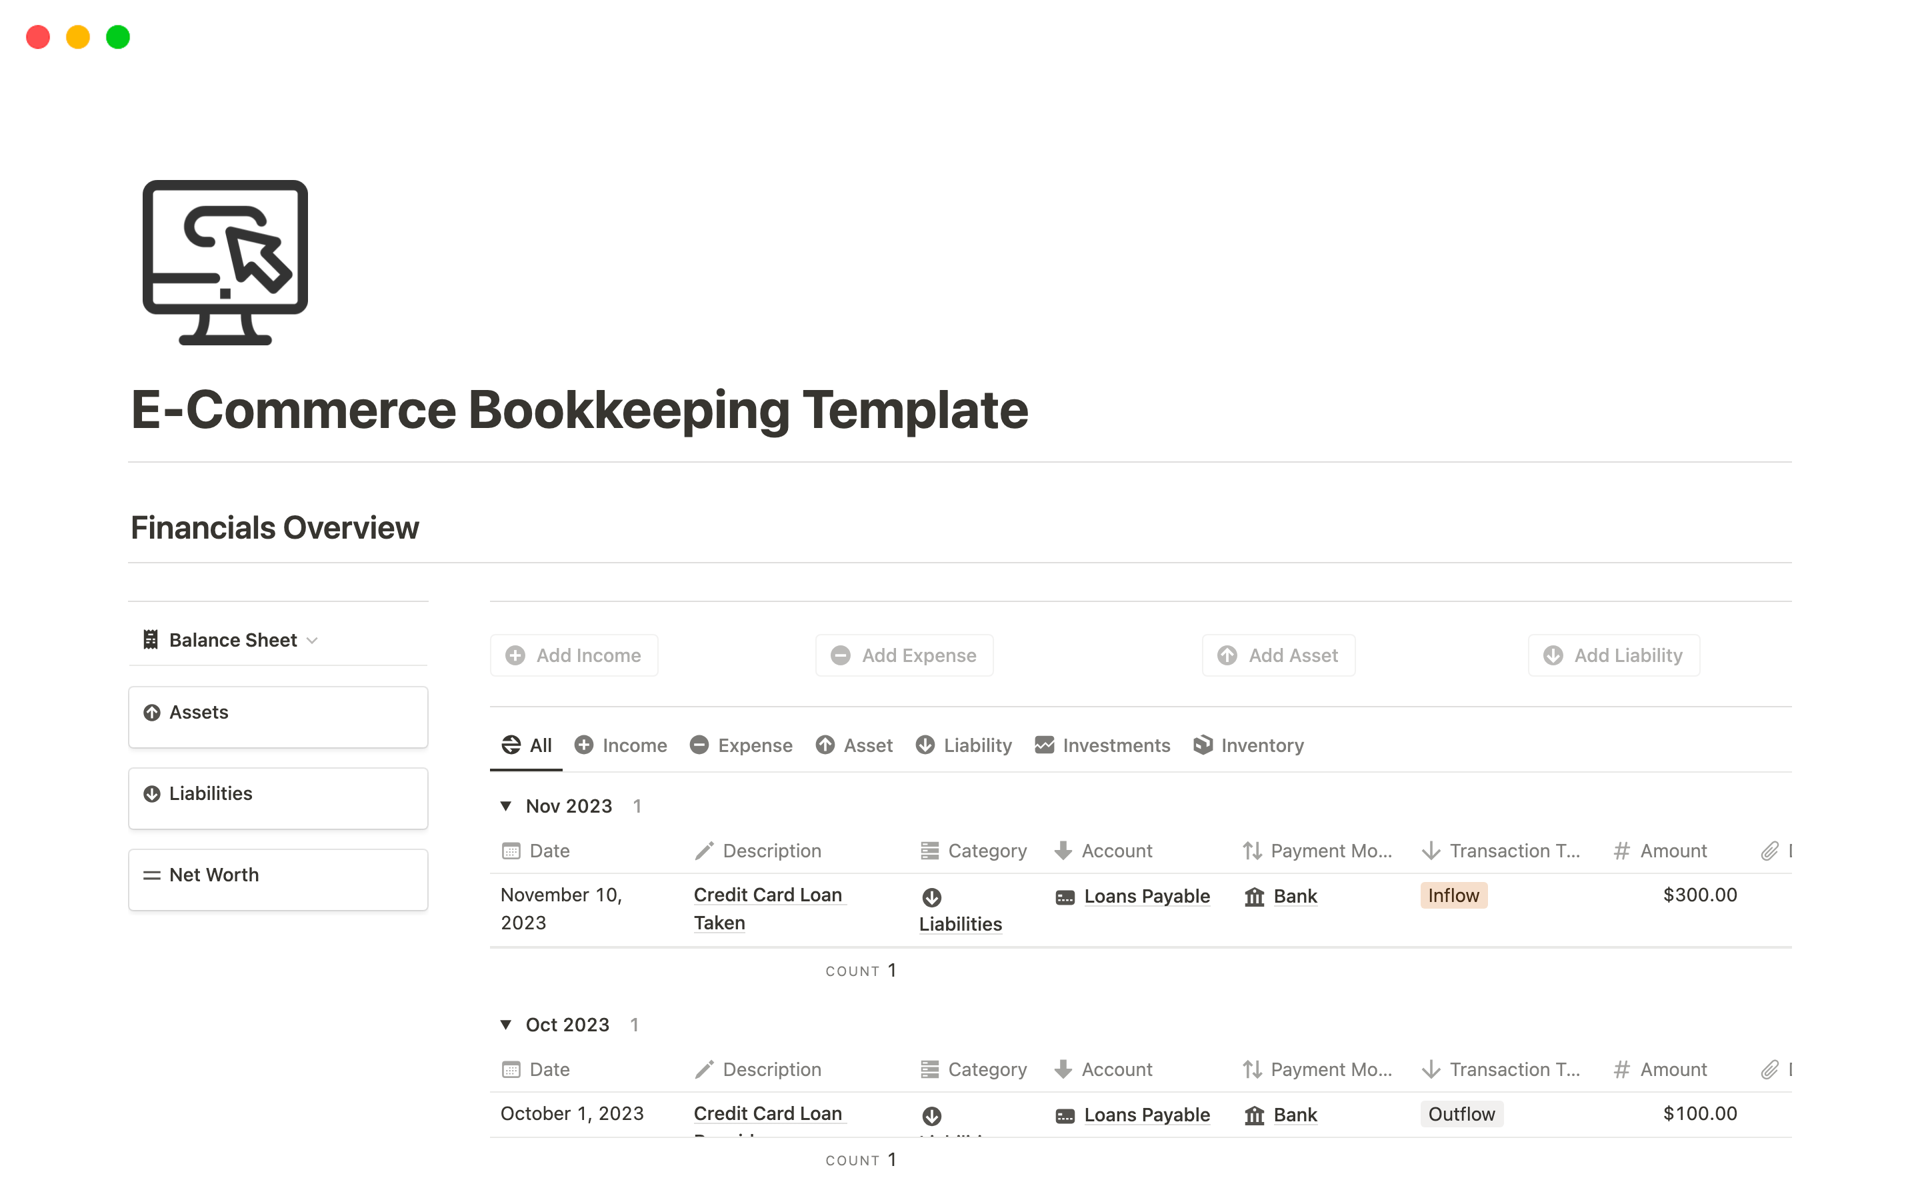 This bookkeeping template provides best solution for E-Commerce business to manage their business finances, produce income statement, balance sheet, cash flow statement and much more on a periodical basis.   